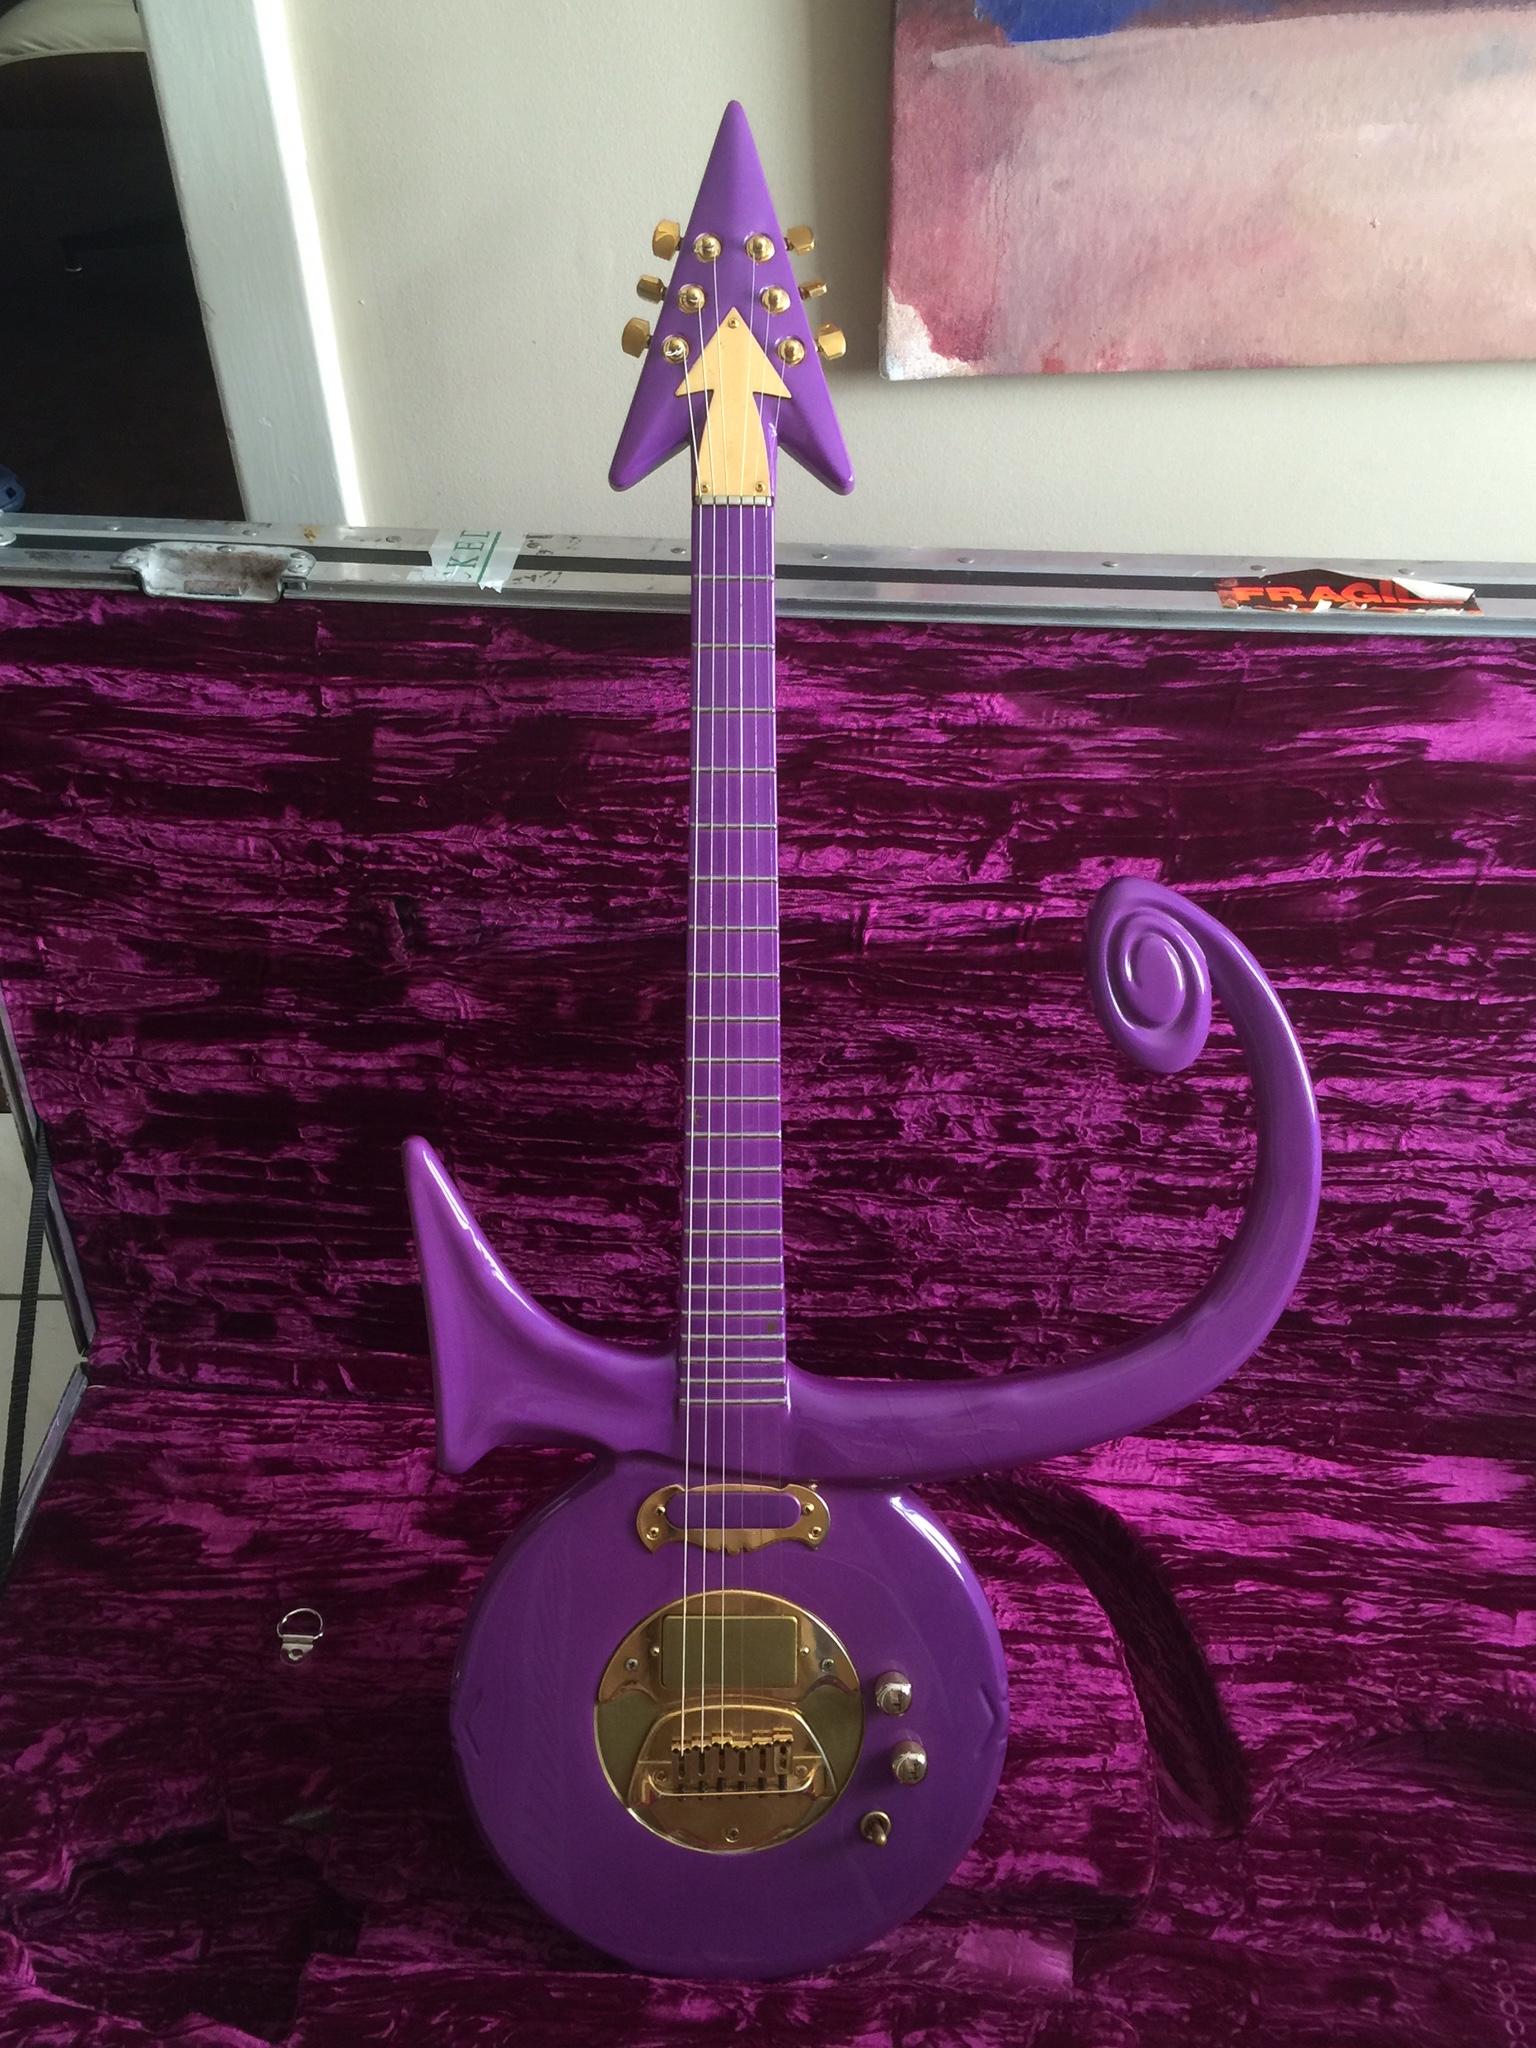 A purple guitar in the shape of 